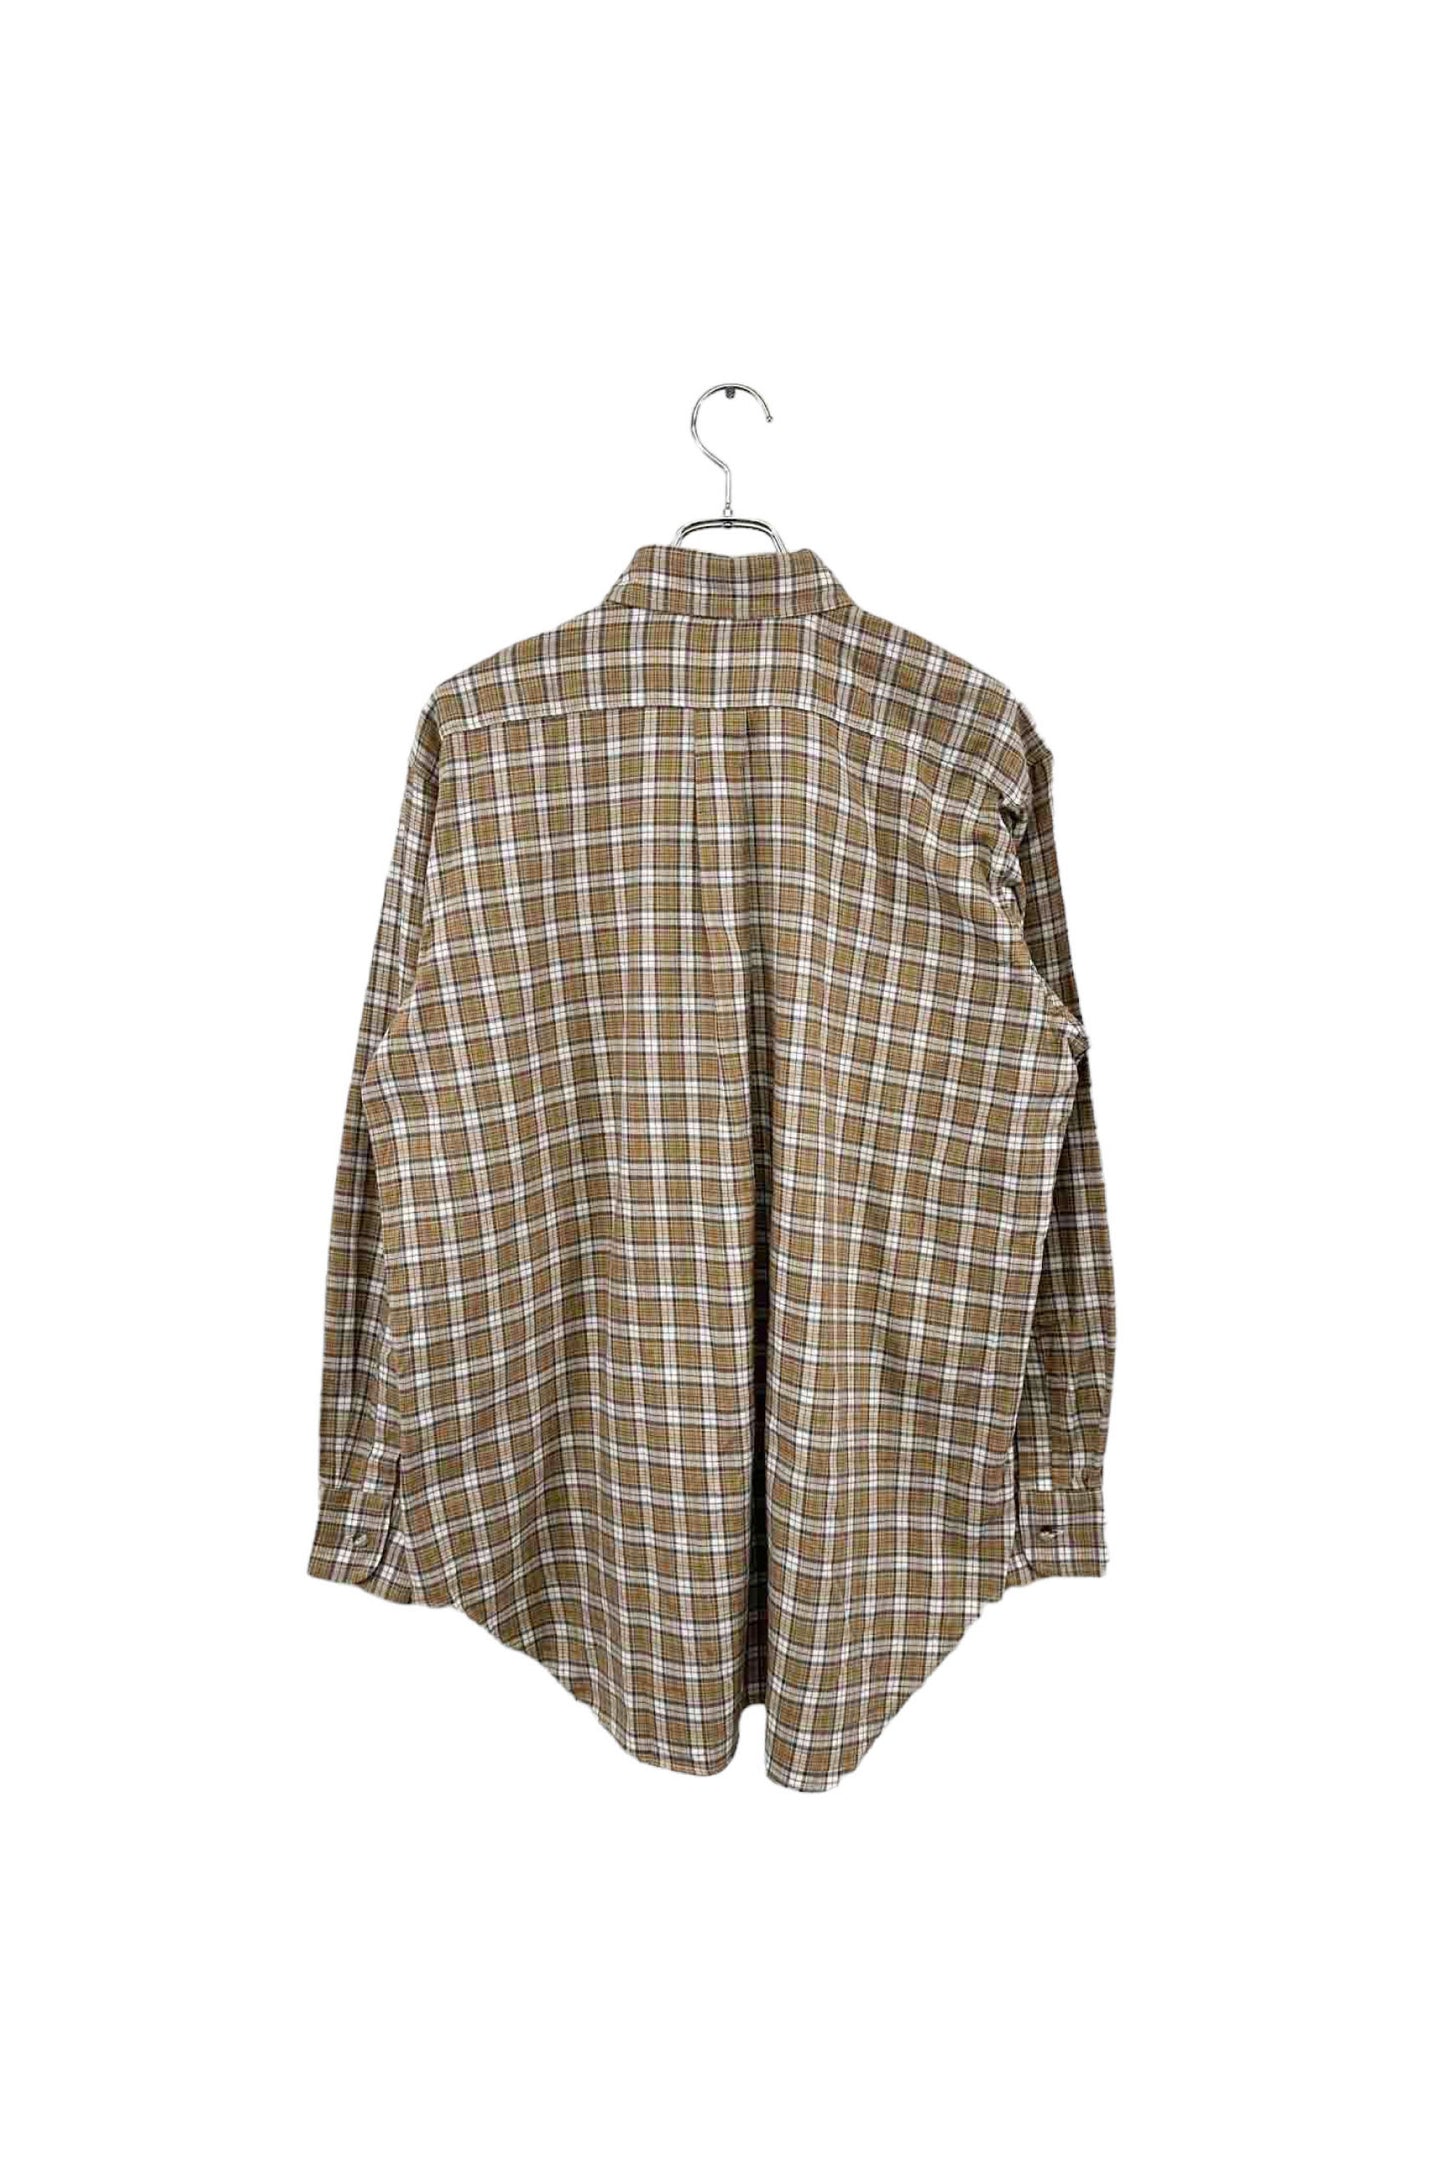 80's~90's Made in USA L.L.Bean check shirt